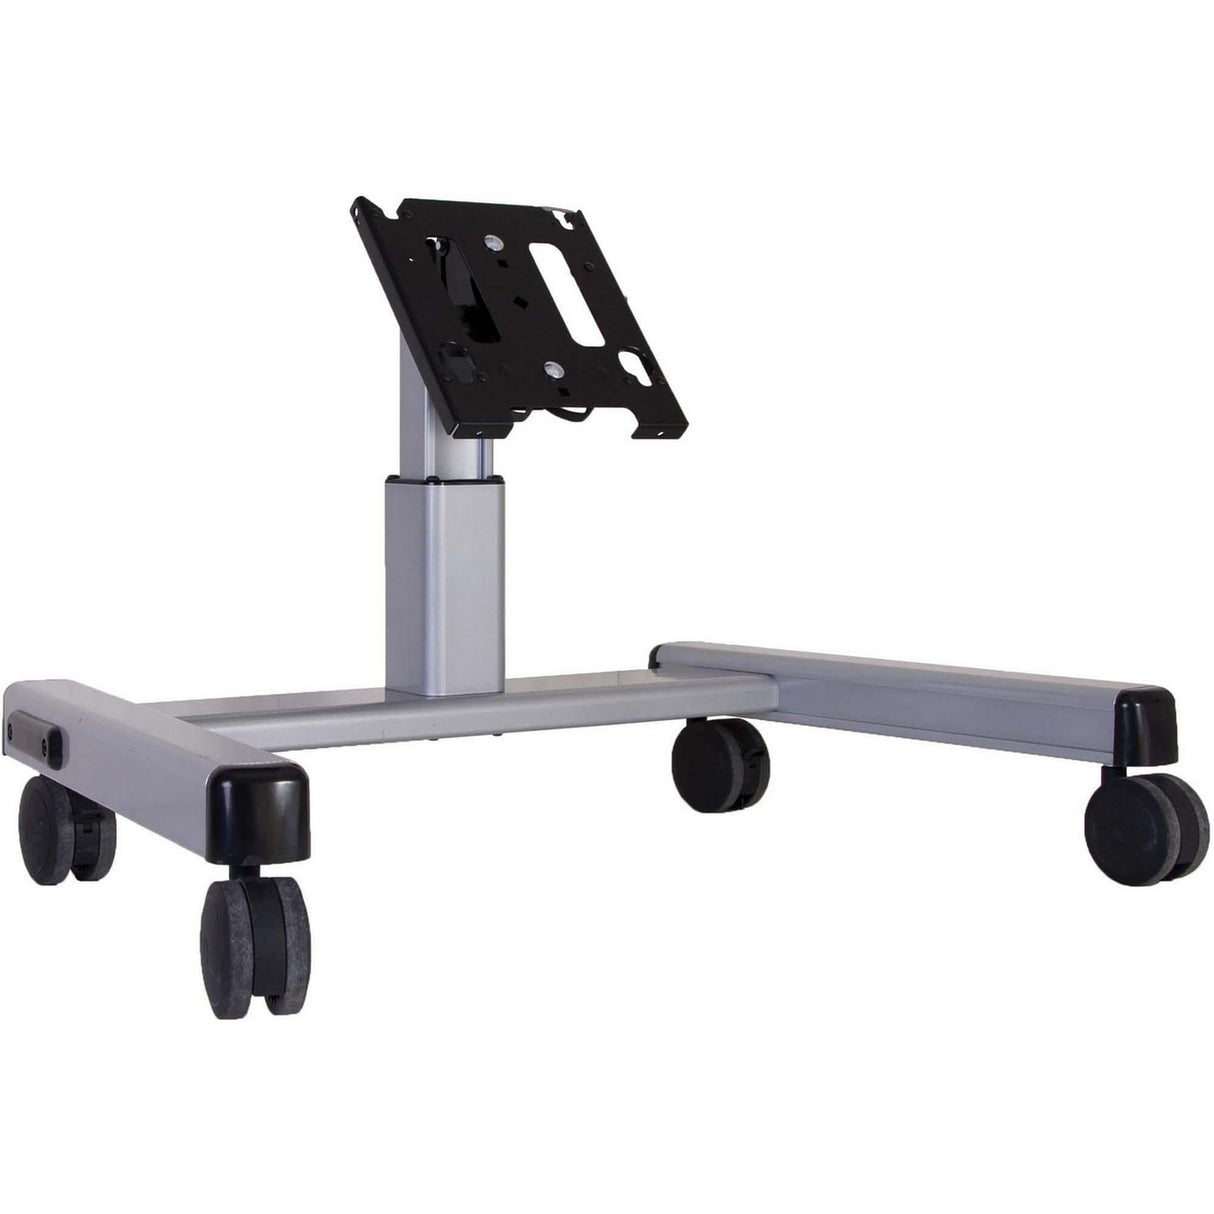 Chief MFQUB Lightweight Collapsible Mobile Cart for 55-Inch Displays